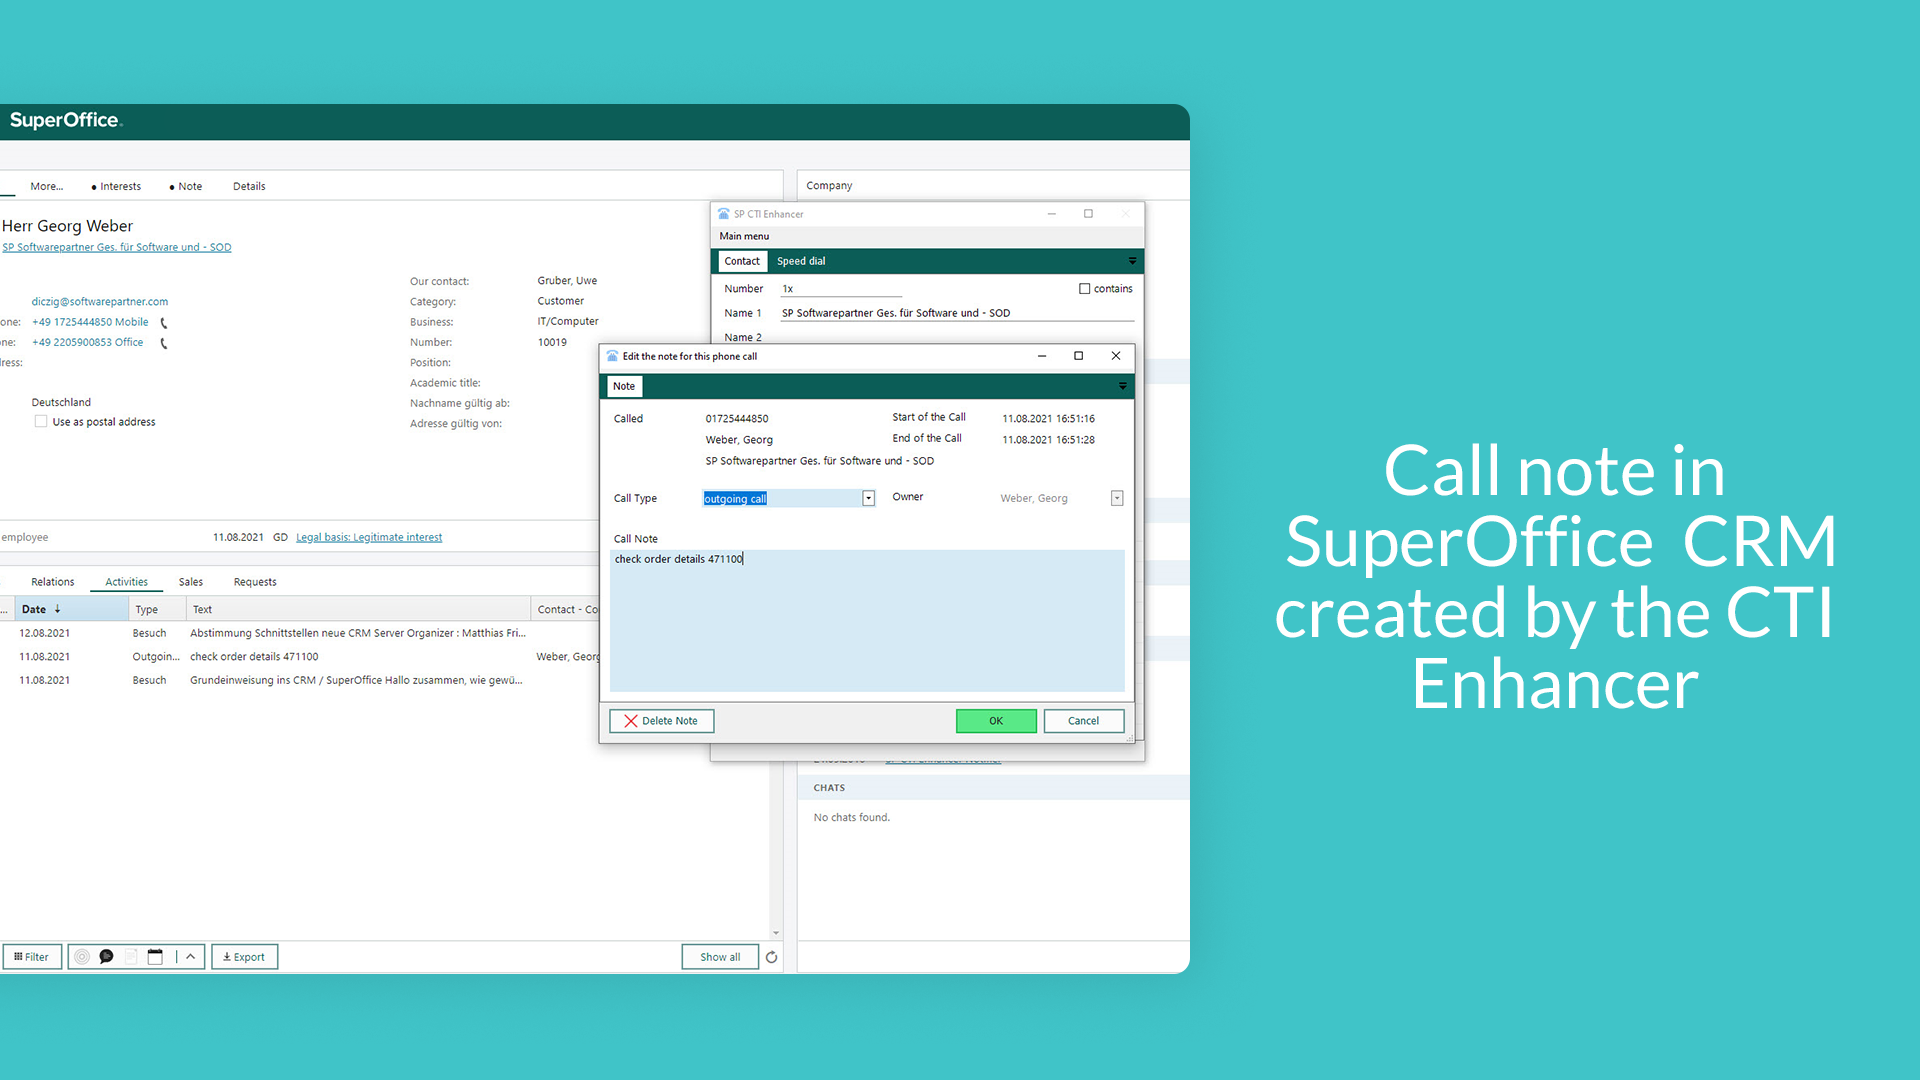 Call note in SuperOffice created by the CTI Enhancer